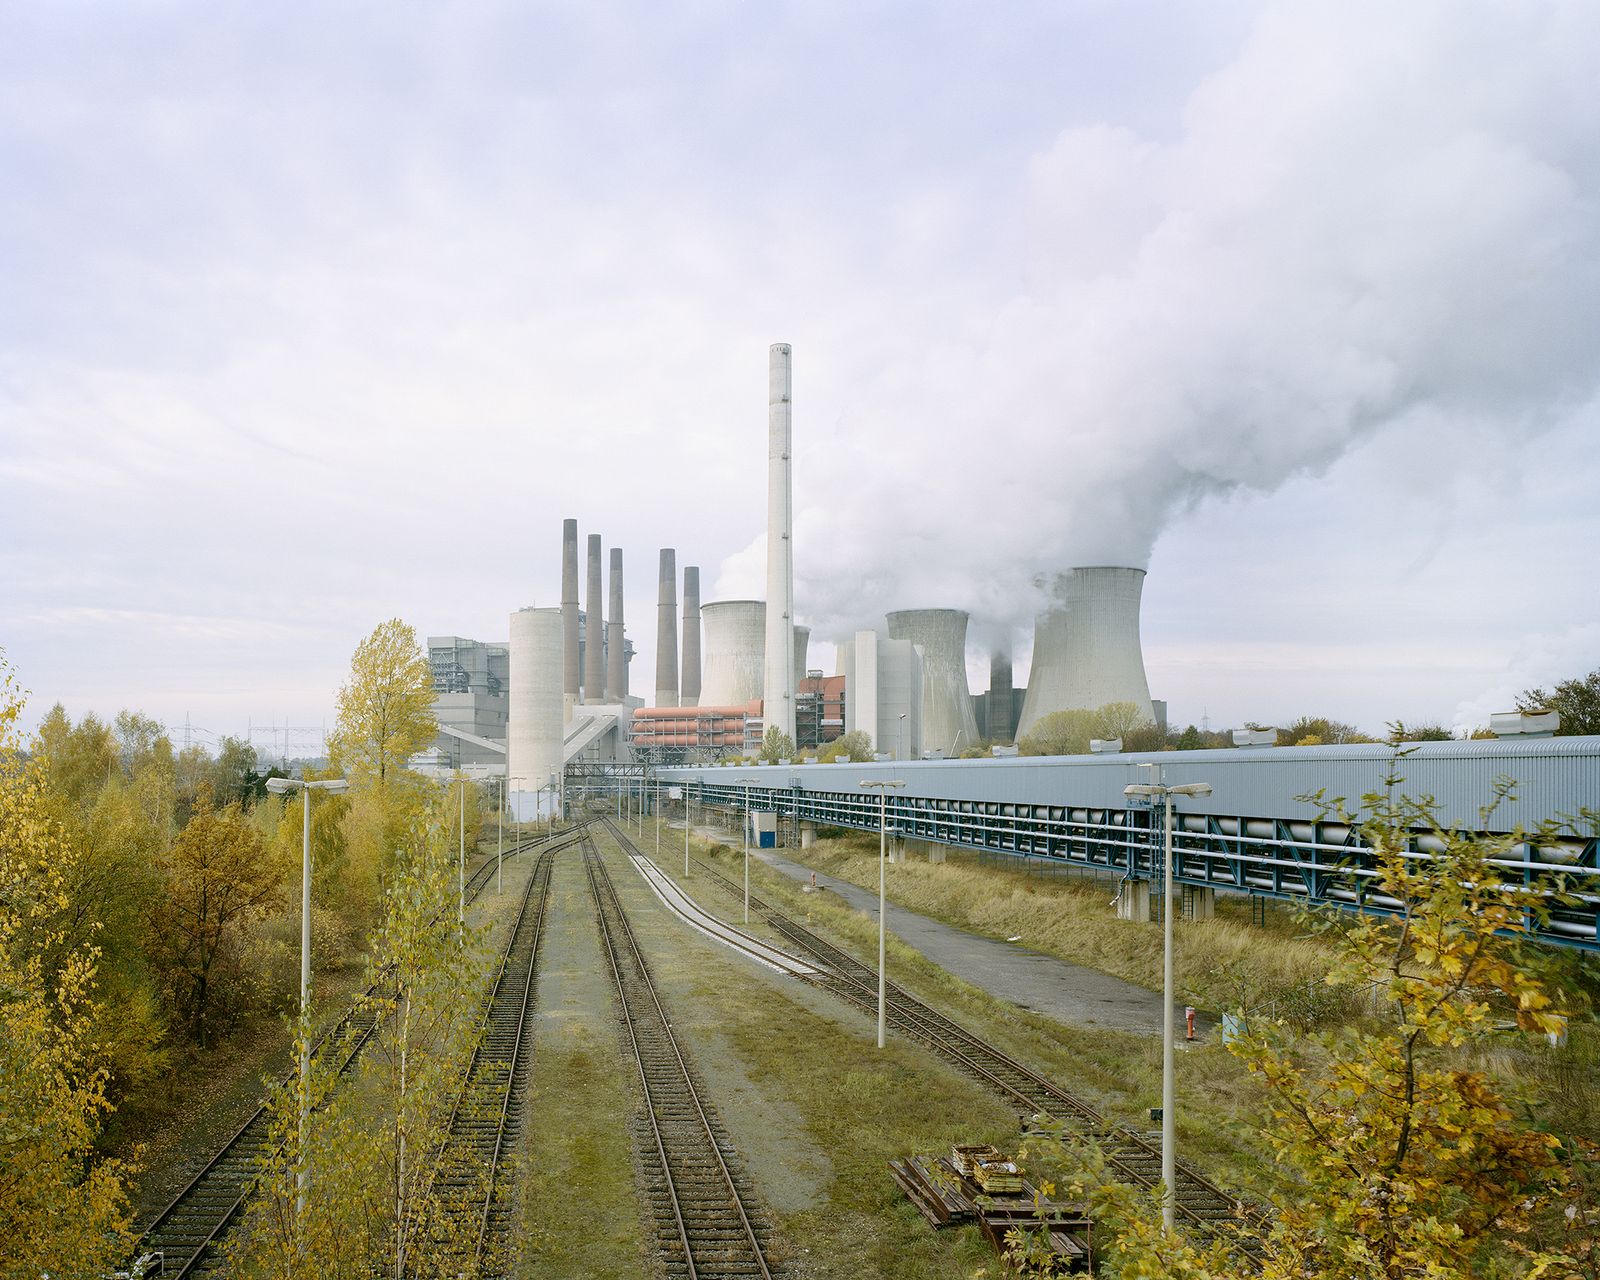 © Pietro Viti - Neurath old plant. The lignite coal arrives here by train, mainly from the same region.